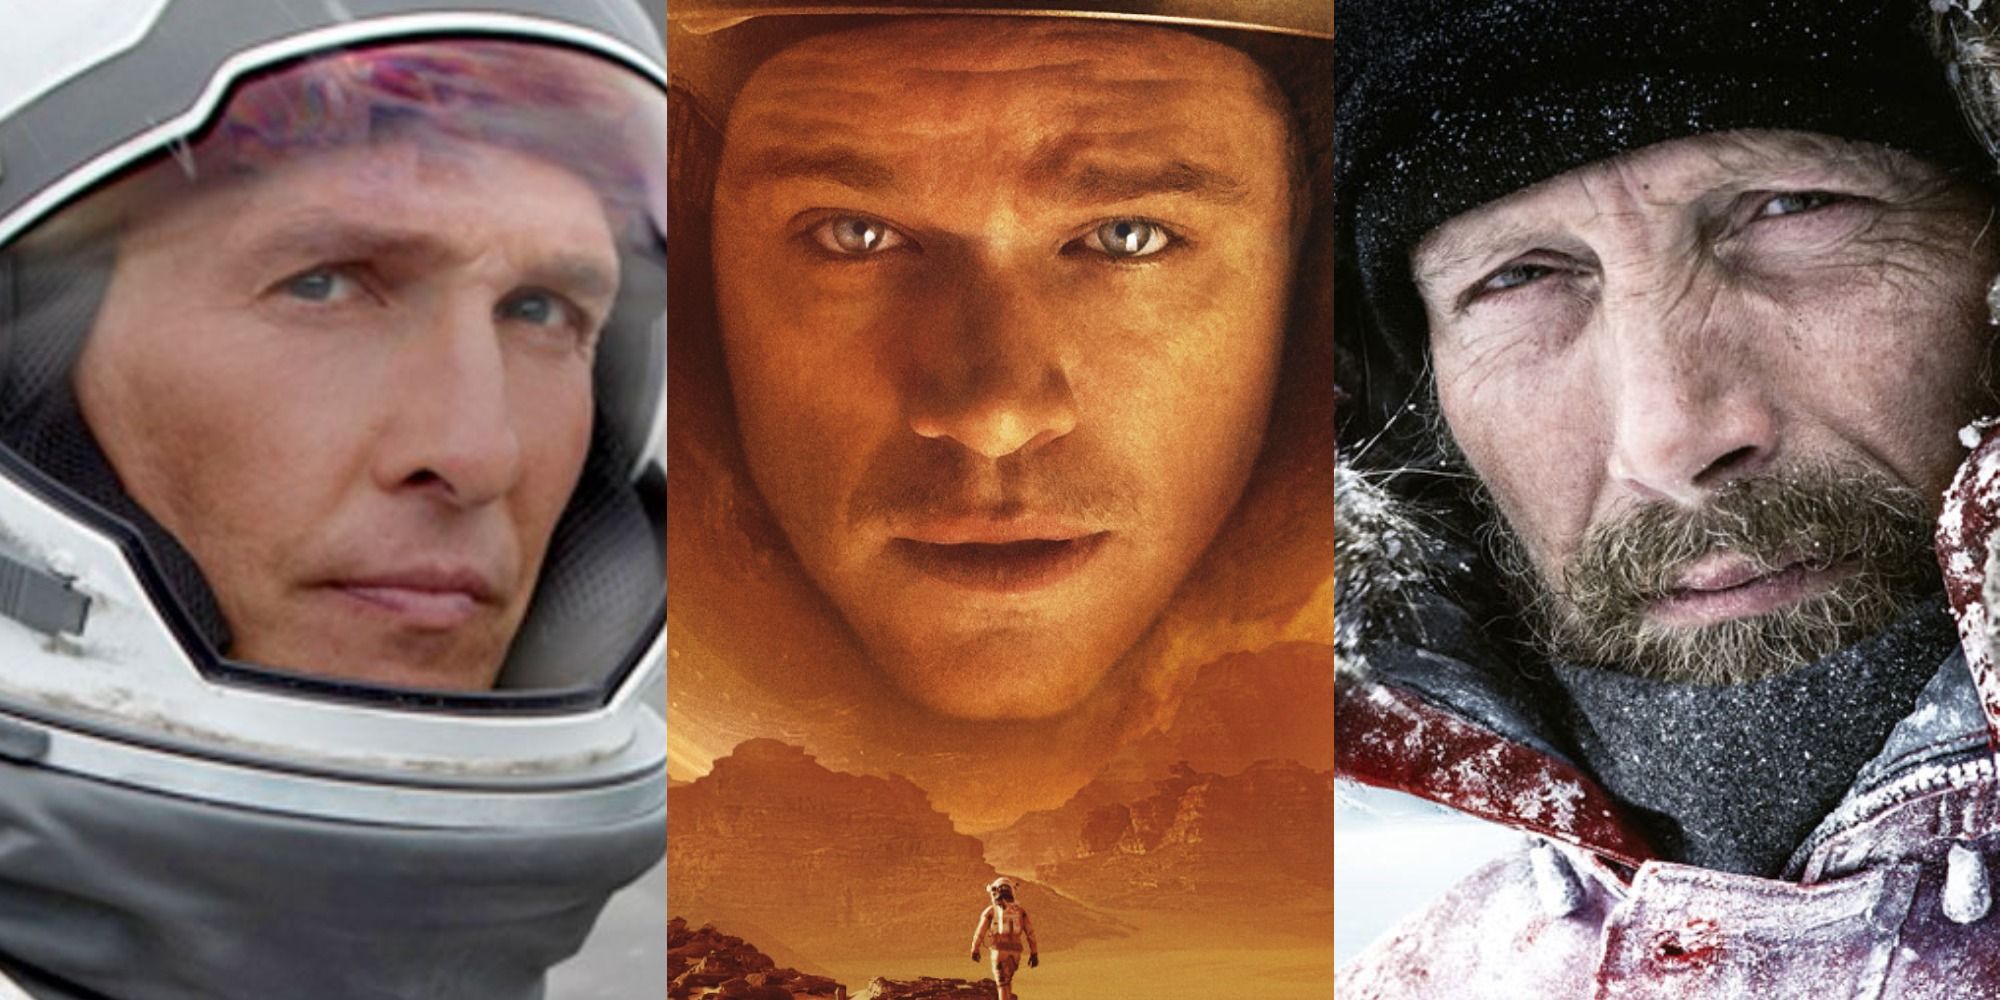 A collage of the faces of Matthew McConaughey in Interstellar, Matt Damon in The Martian and Mads Mikkelsen in Arctic from promo images